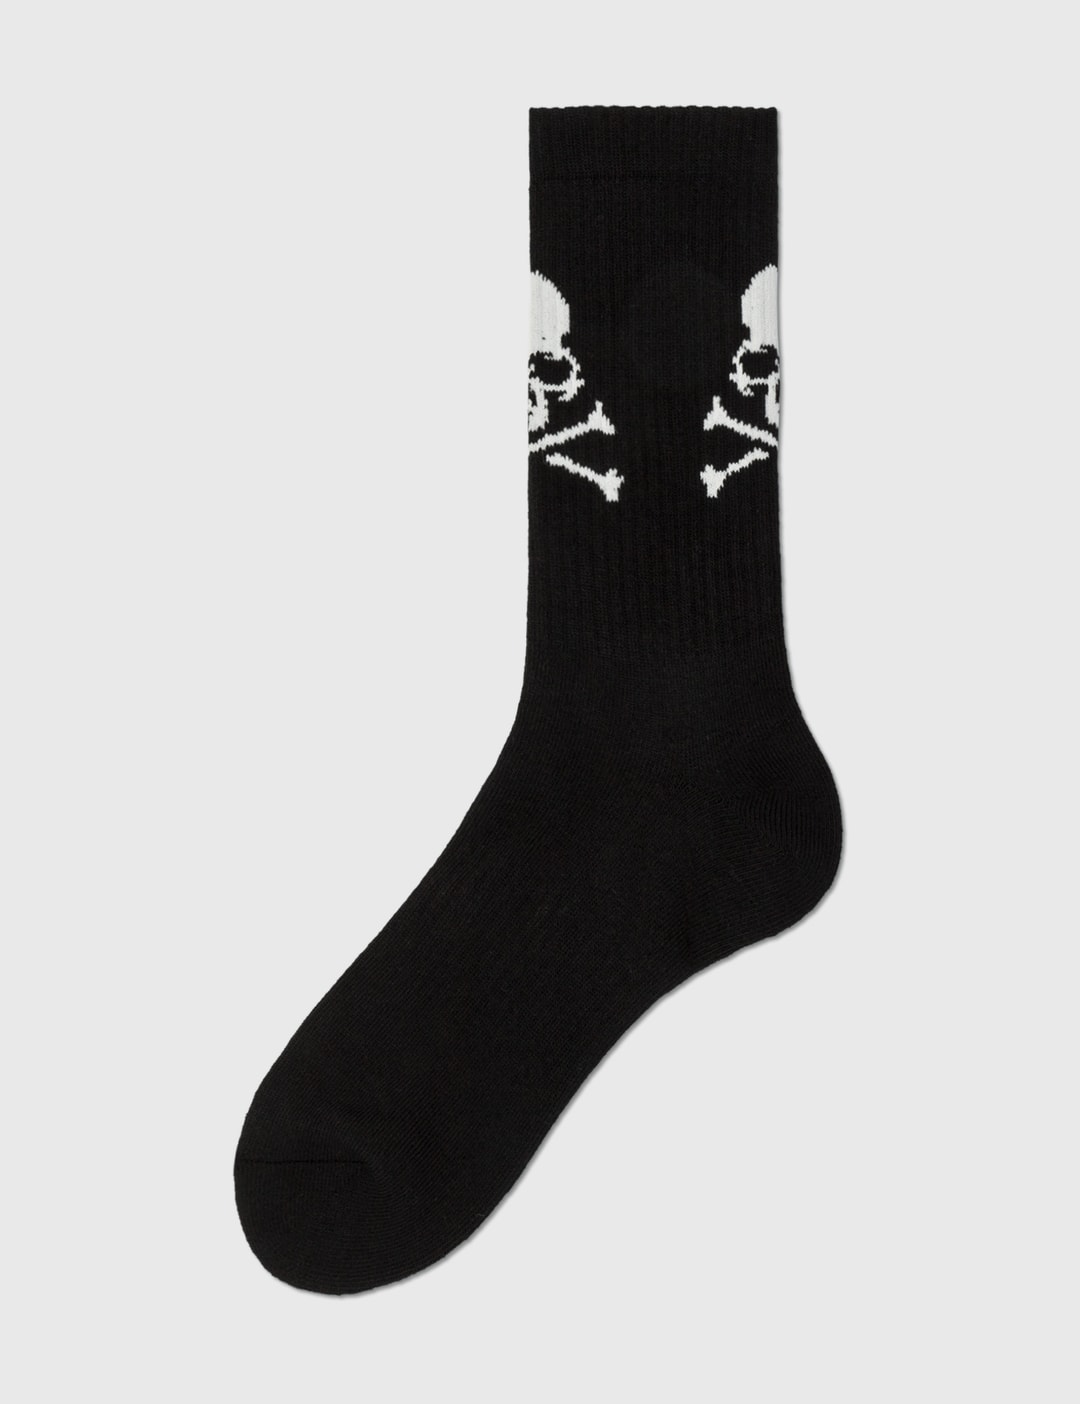 Mastermind Japan - Anagram Socks | HBX - Globally Curated Fashion and ...